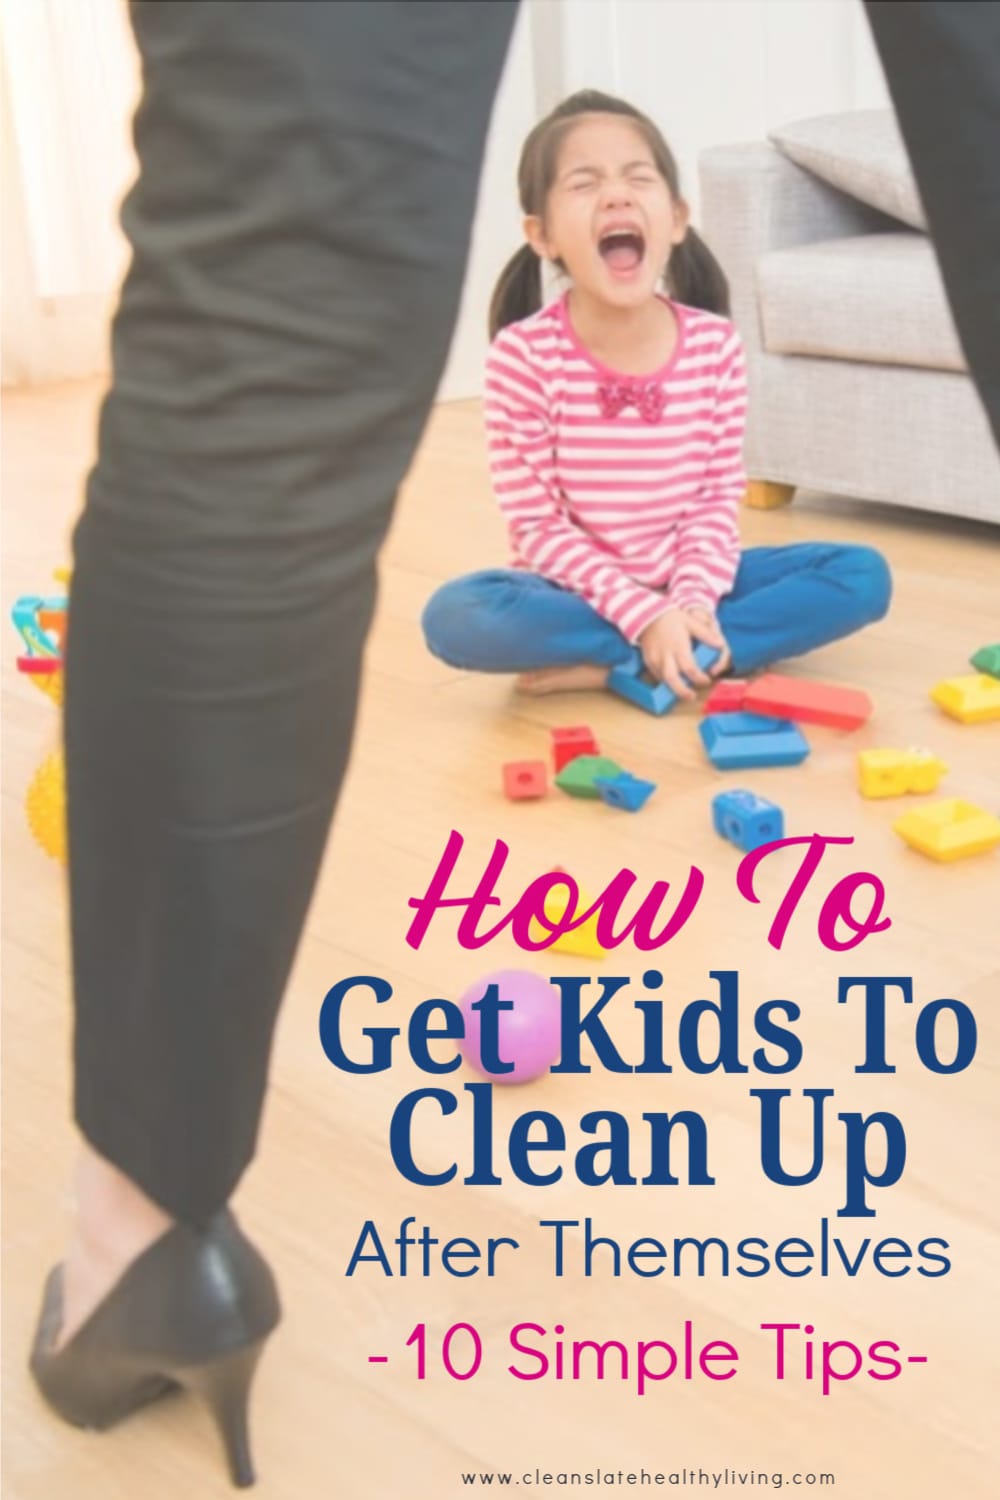 How to get kids to clean up after themselves: 10 simple tips